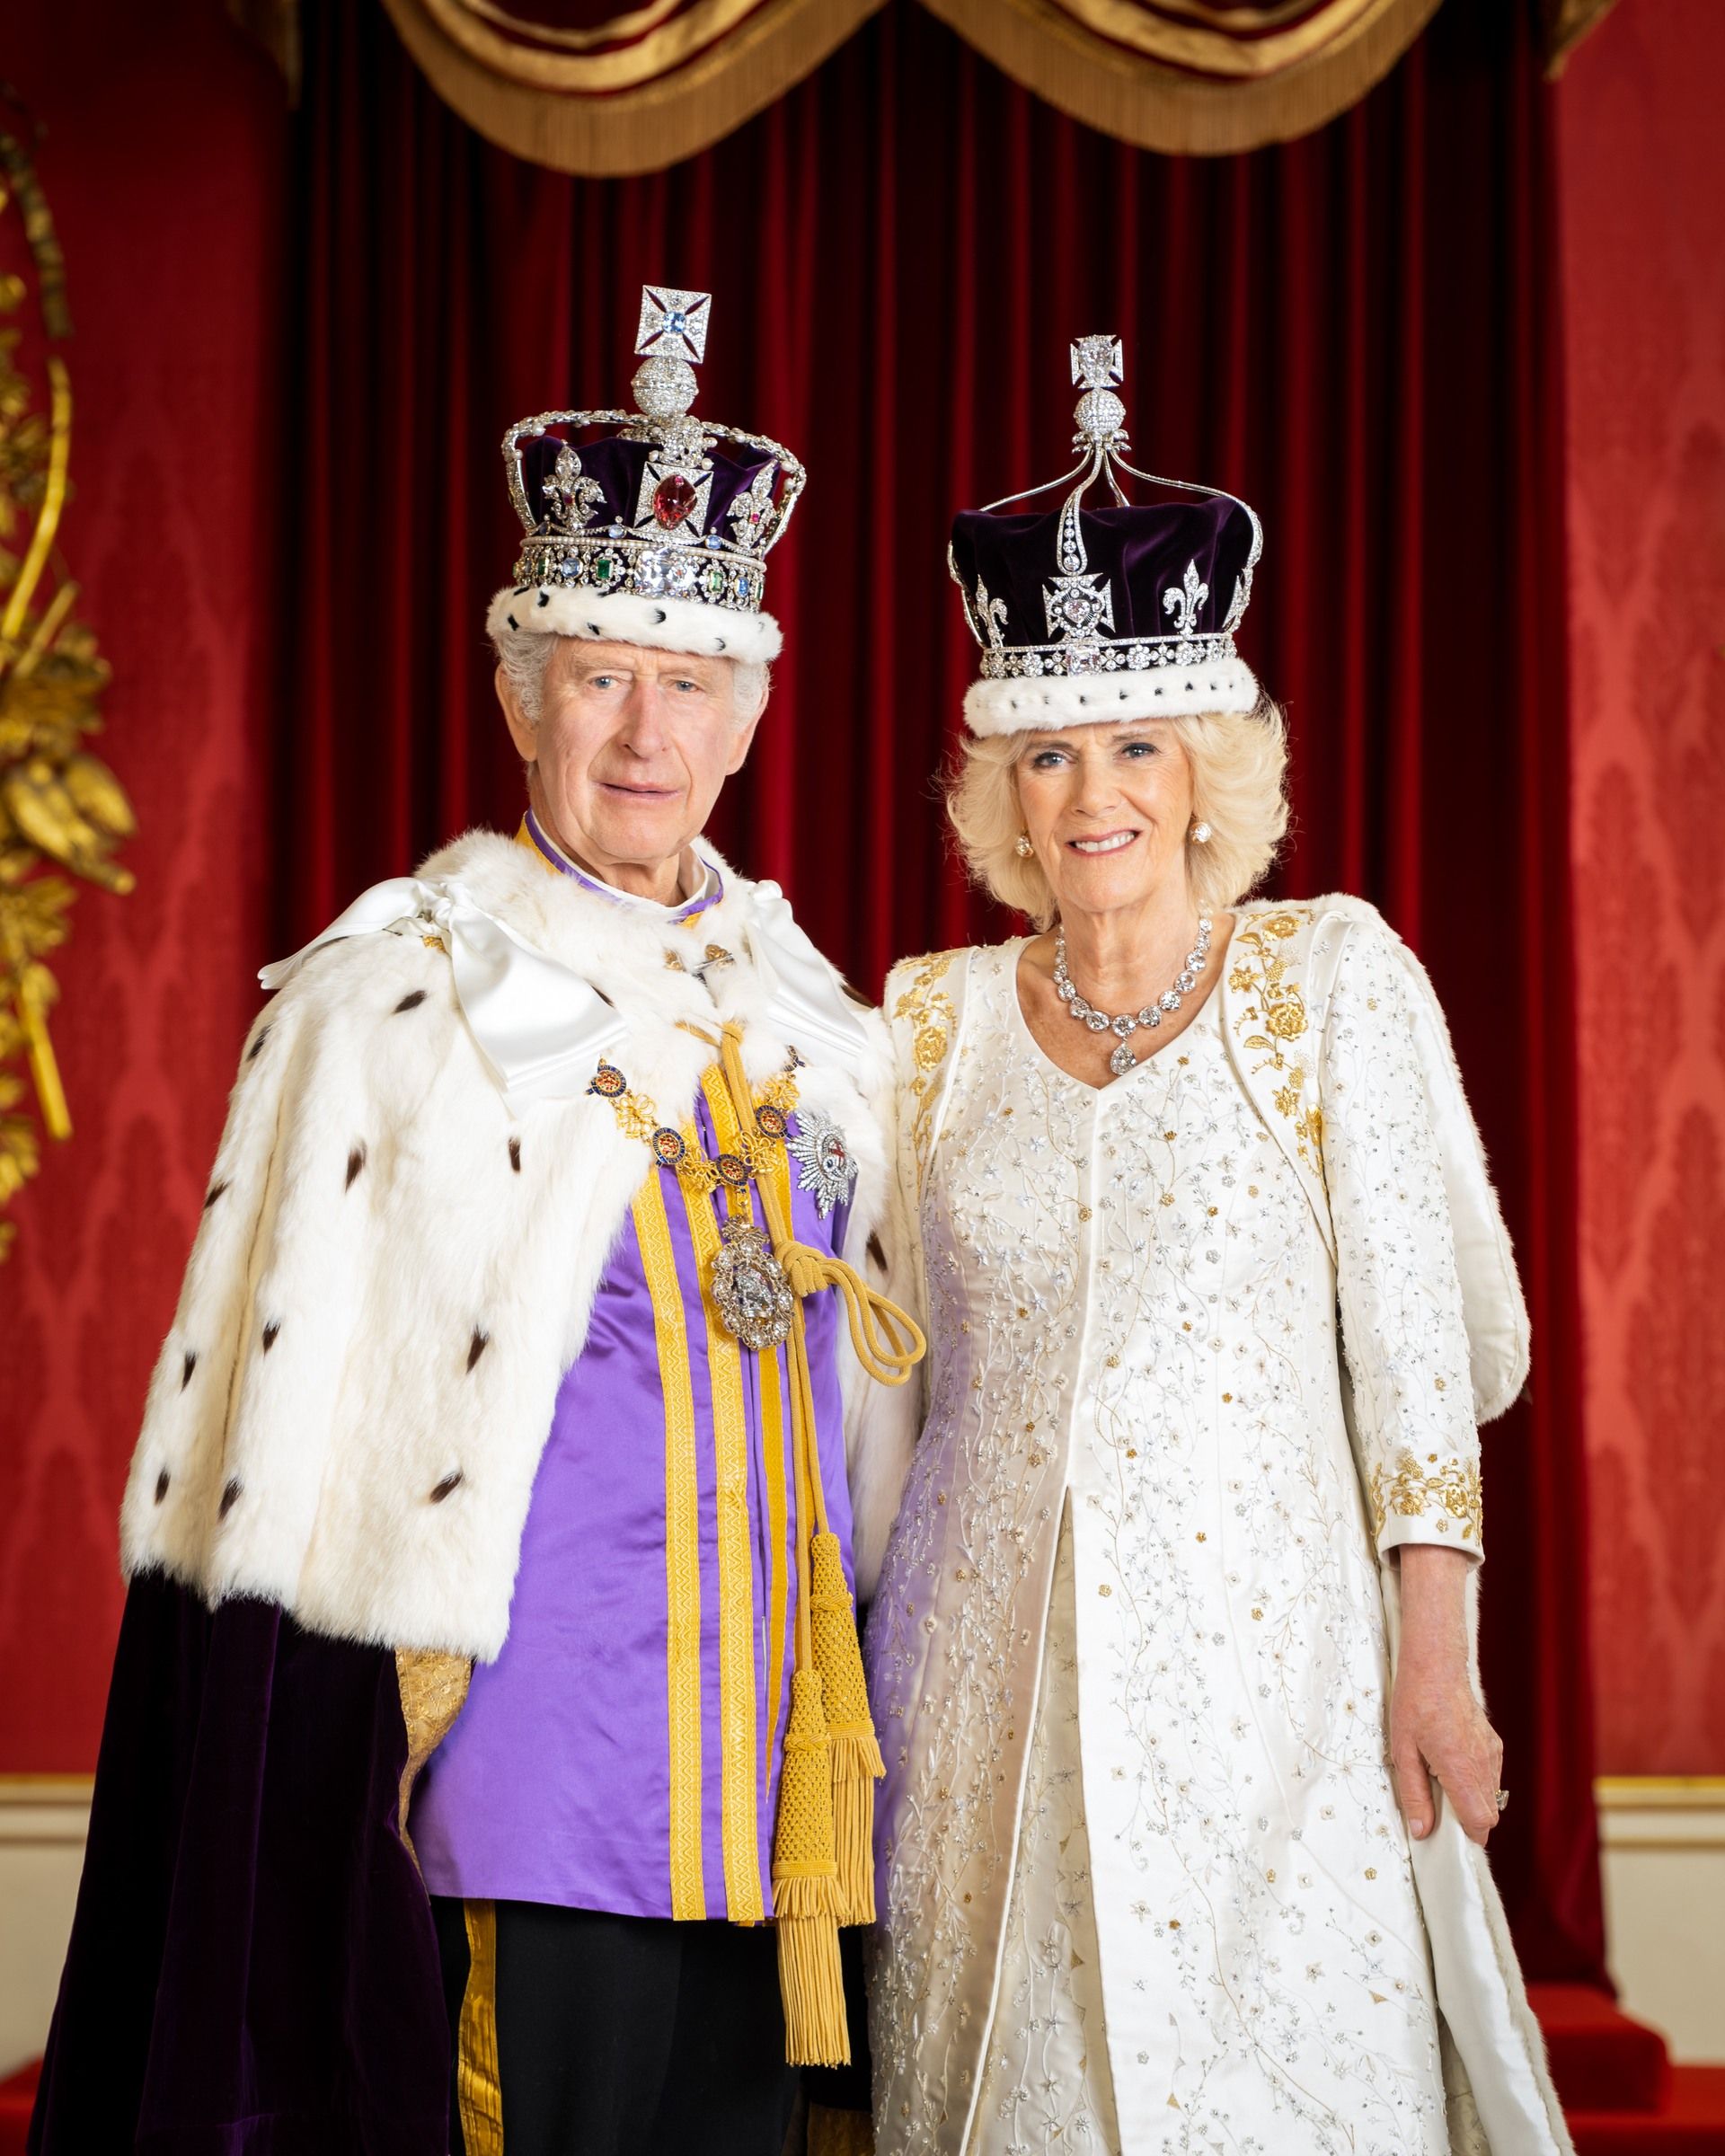 MONARCH: King Charles and Queen Camilla in their first official portrait